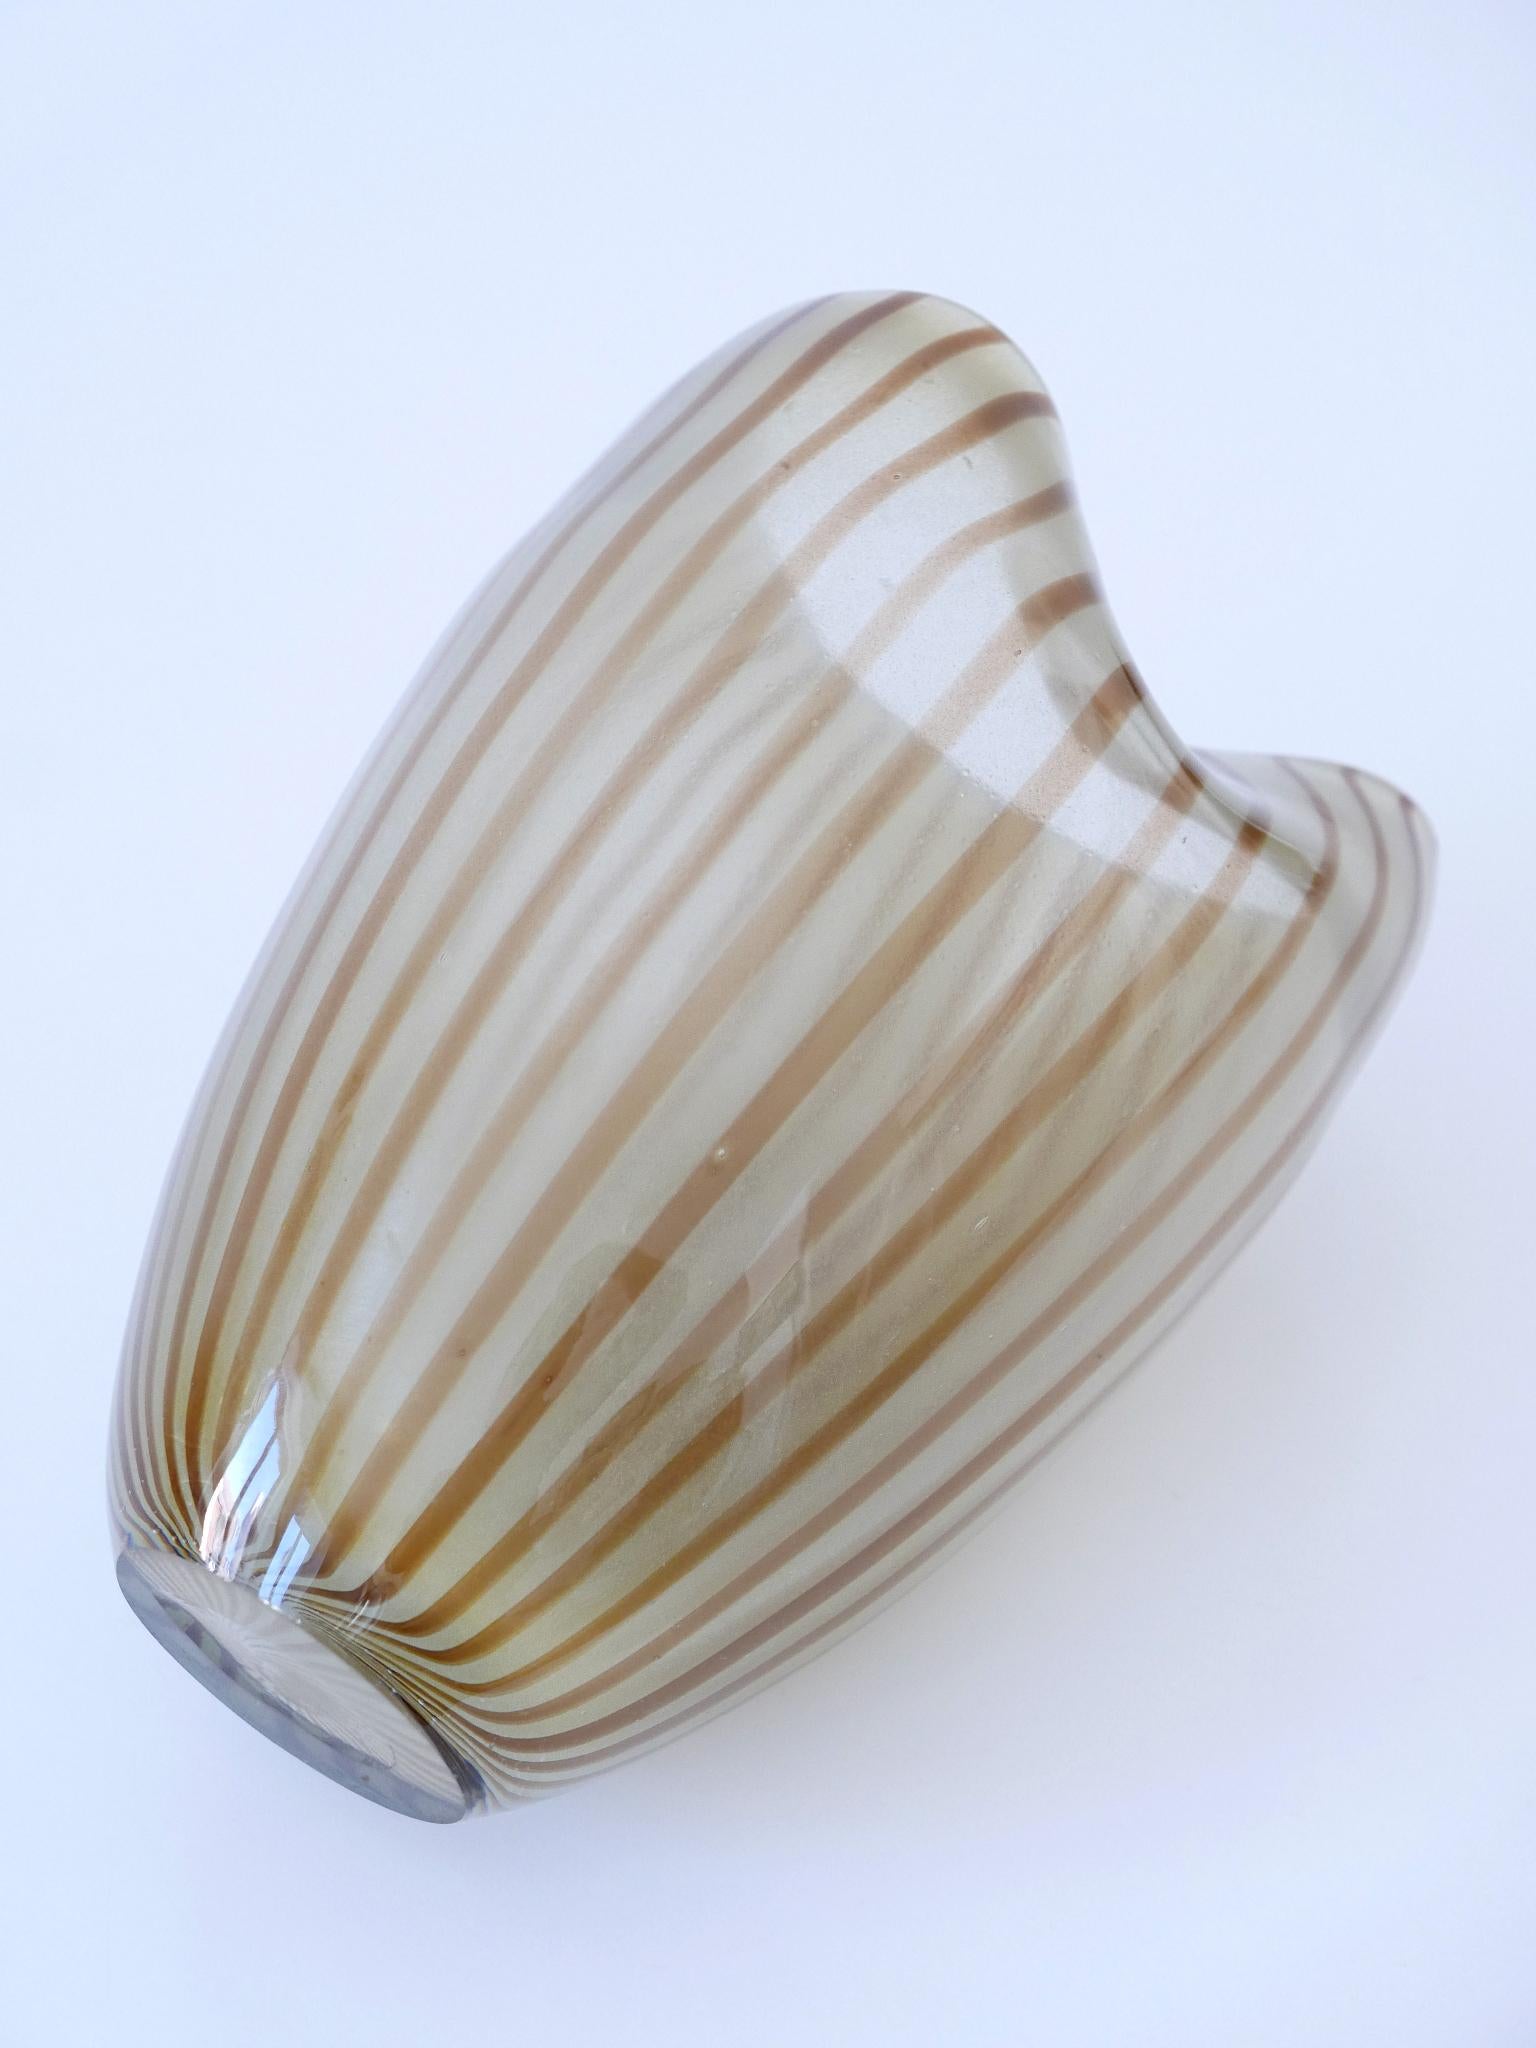 Decorative Mid Century Modern Murano Glass Vase Italy 1960s  For Sale 12